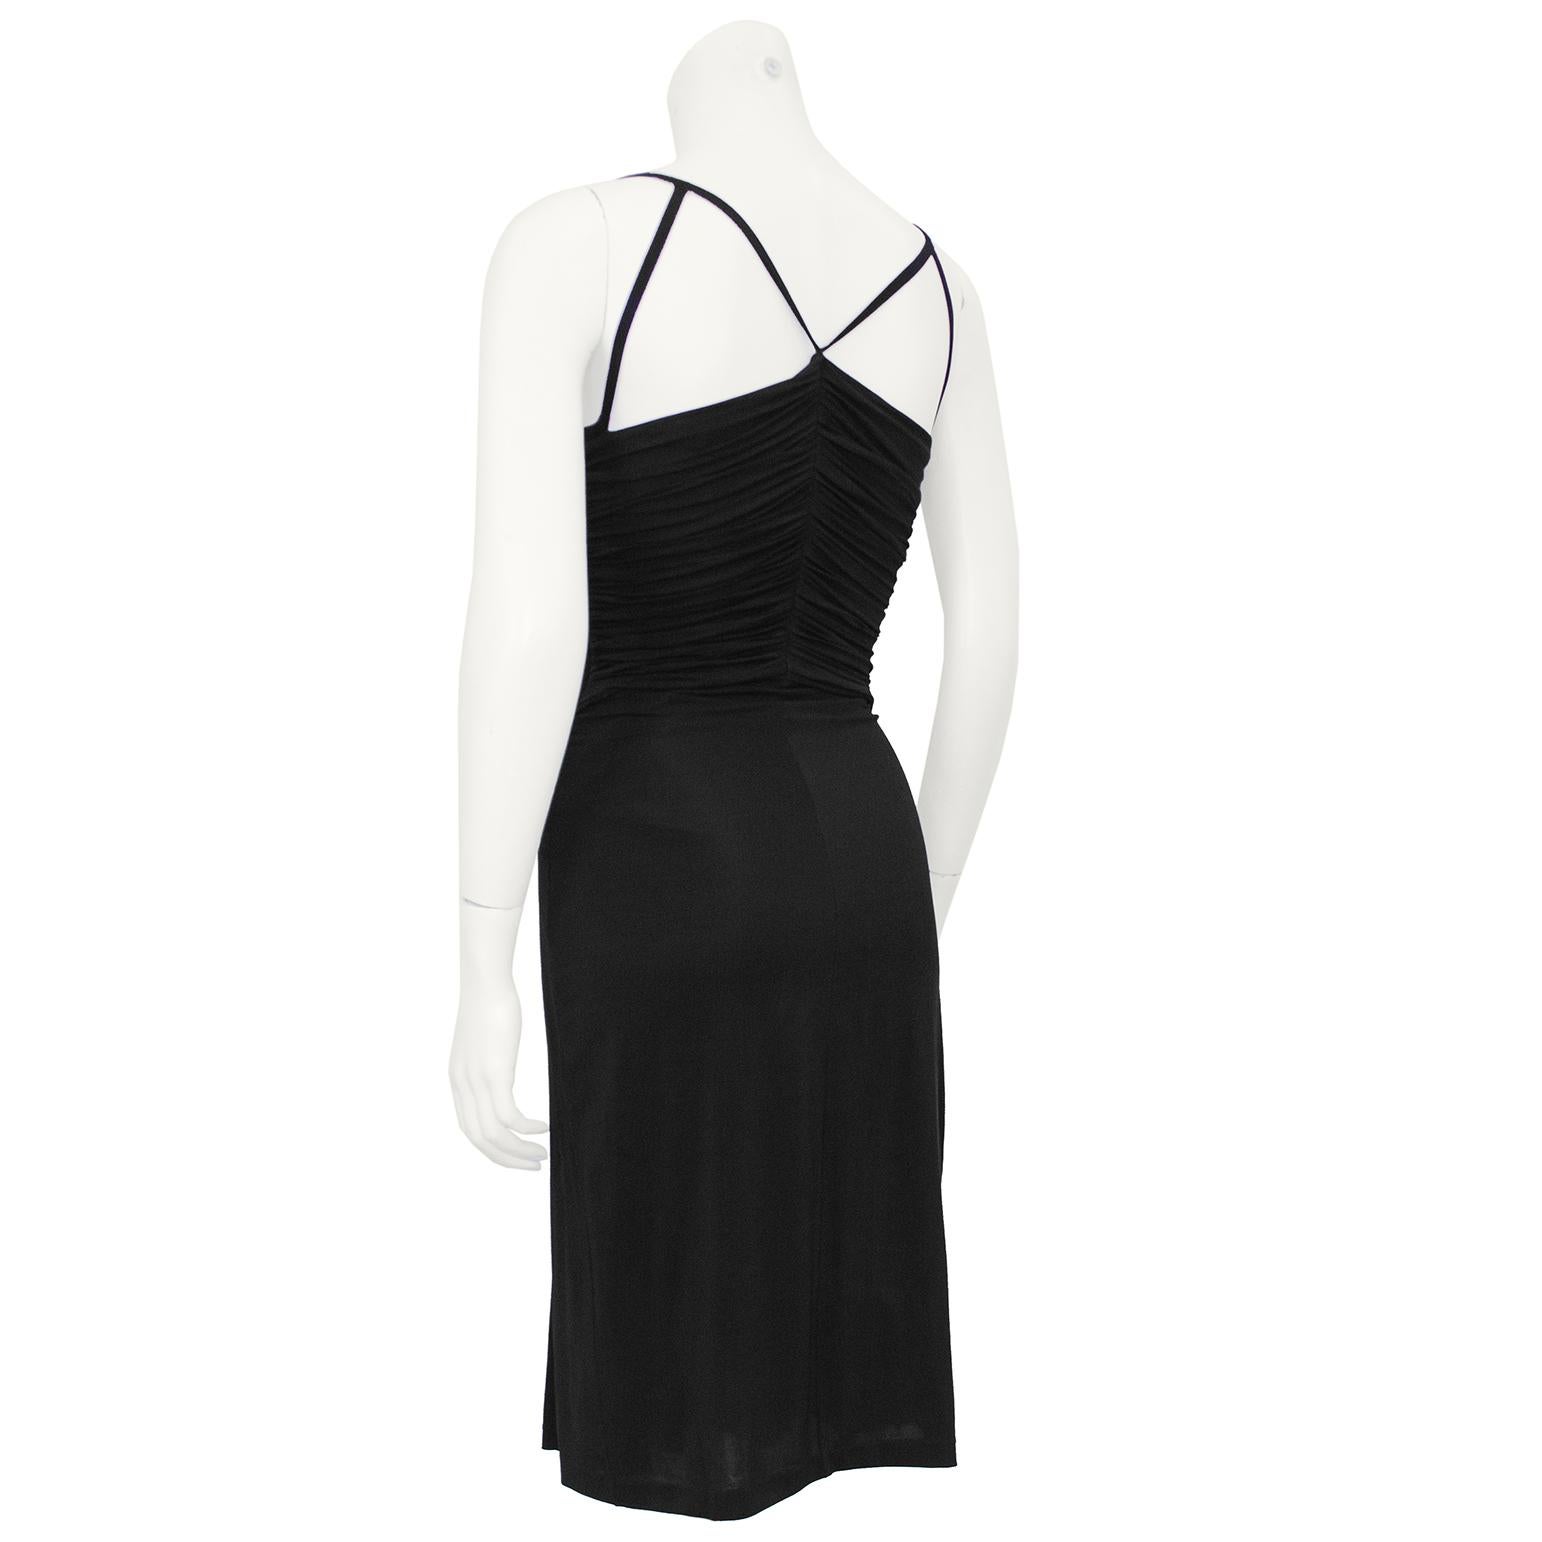 2000s Roberto Cavalli Black Grecian Style Cocktail Dress In Good Condition For Sale In Toronto, Ontario